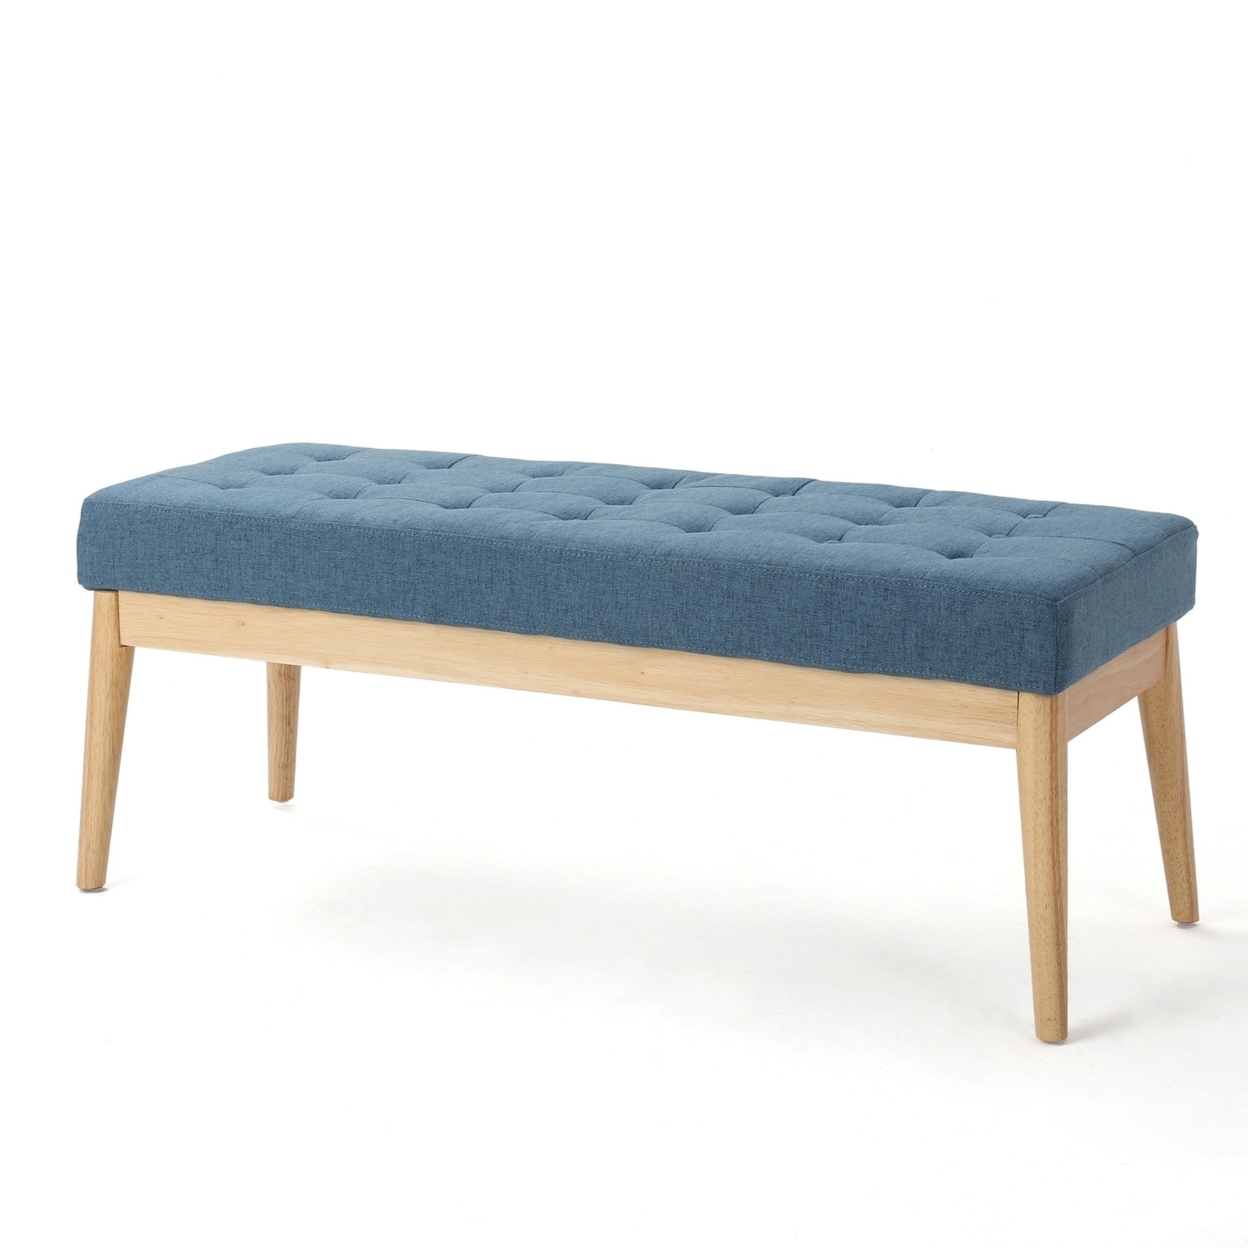 Anglo Modern Mid-Century Fabric Bench - Air Force Blue